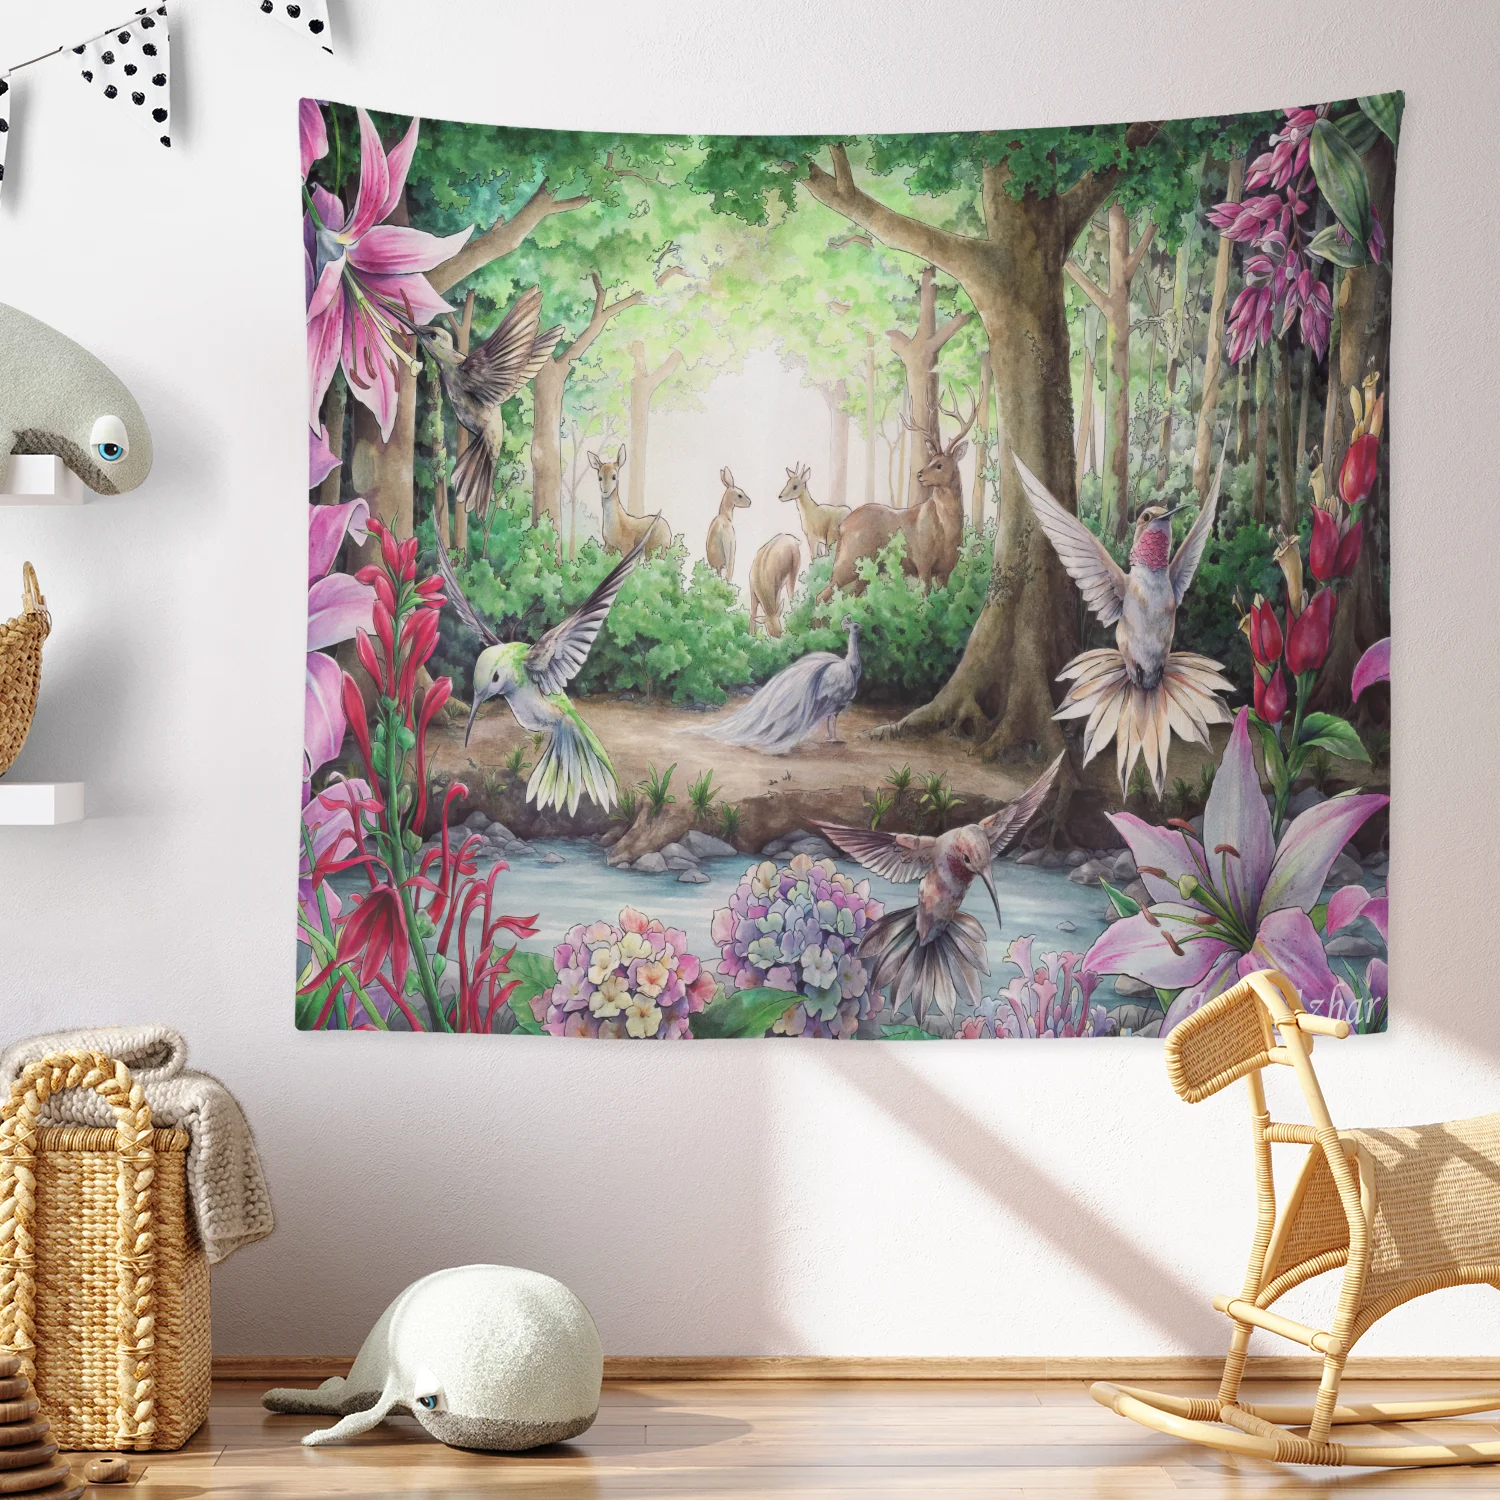 

Watercolor Anime Forest Cute Hummingbird Deer Wall Tapestry Free Shipping Eco Friendly Plants Flower Printed Wall Hanging